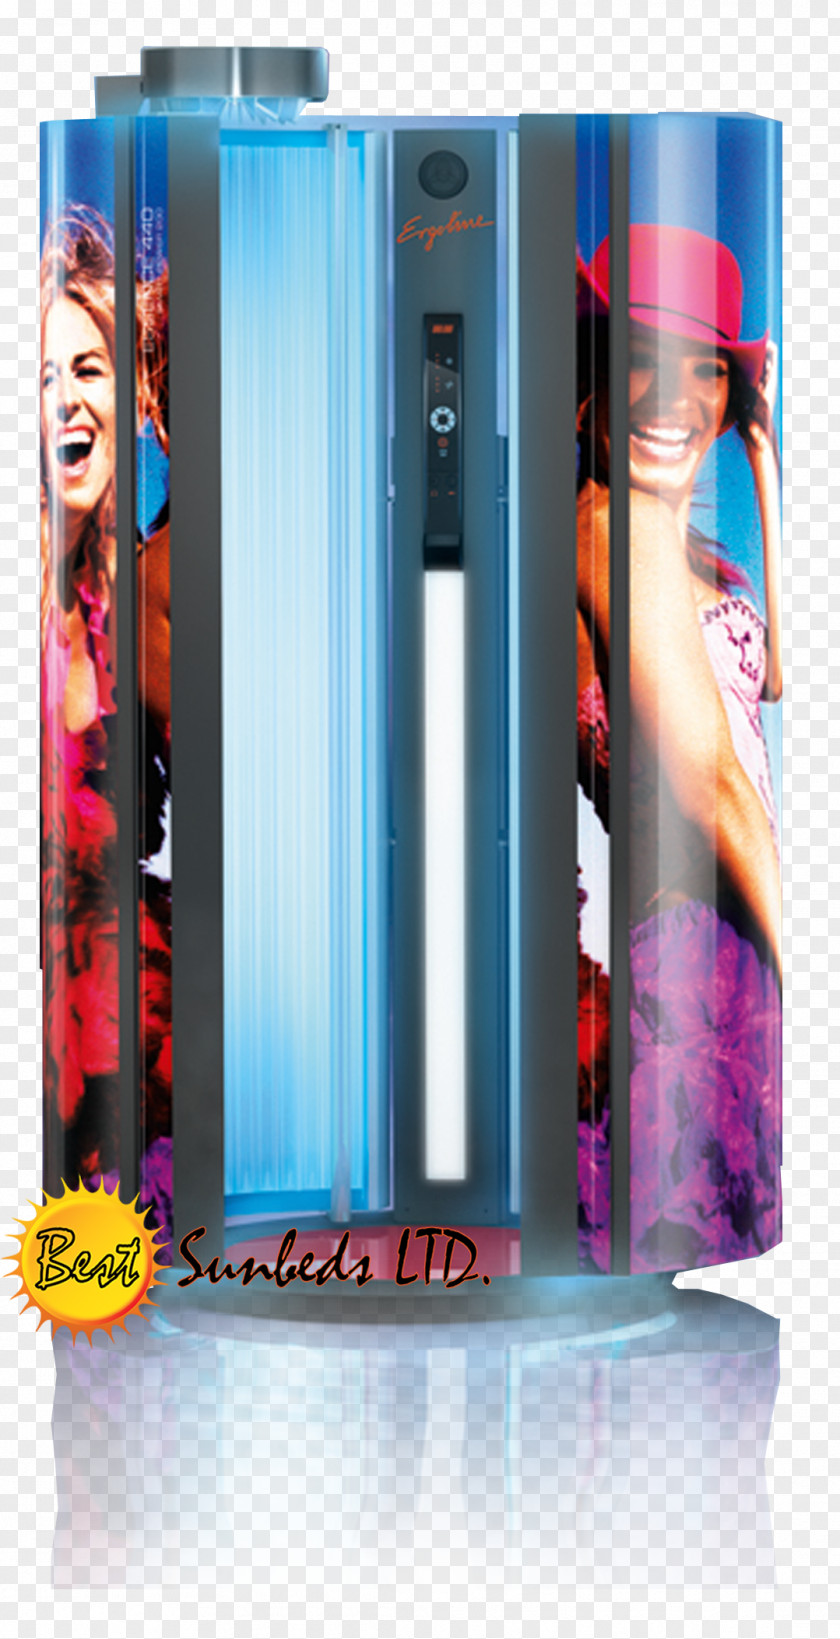 Sun Bed Display Device Advertising Computer Monitors PNG